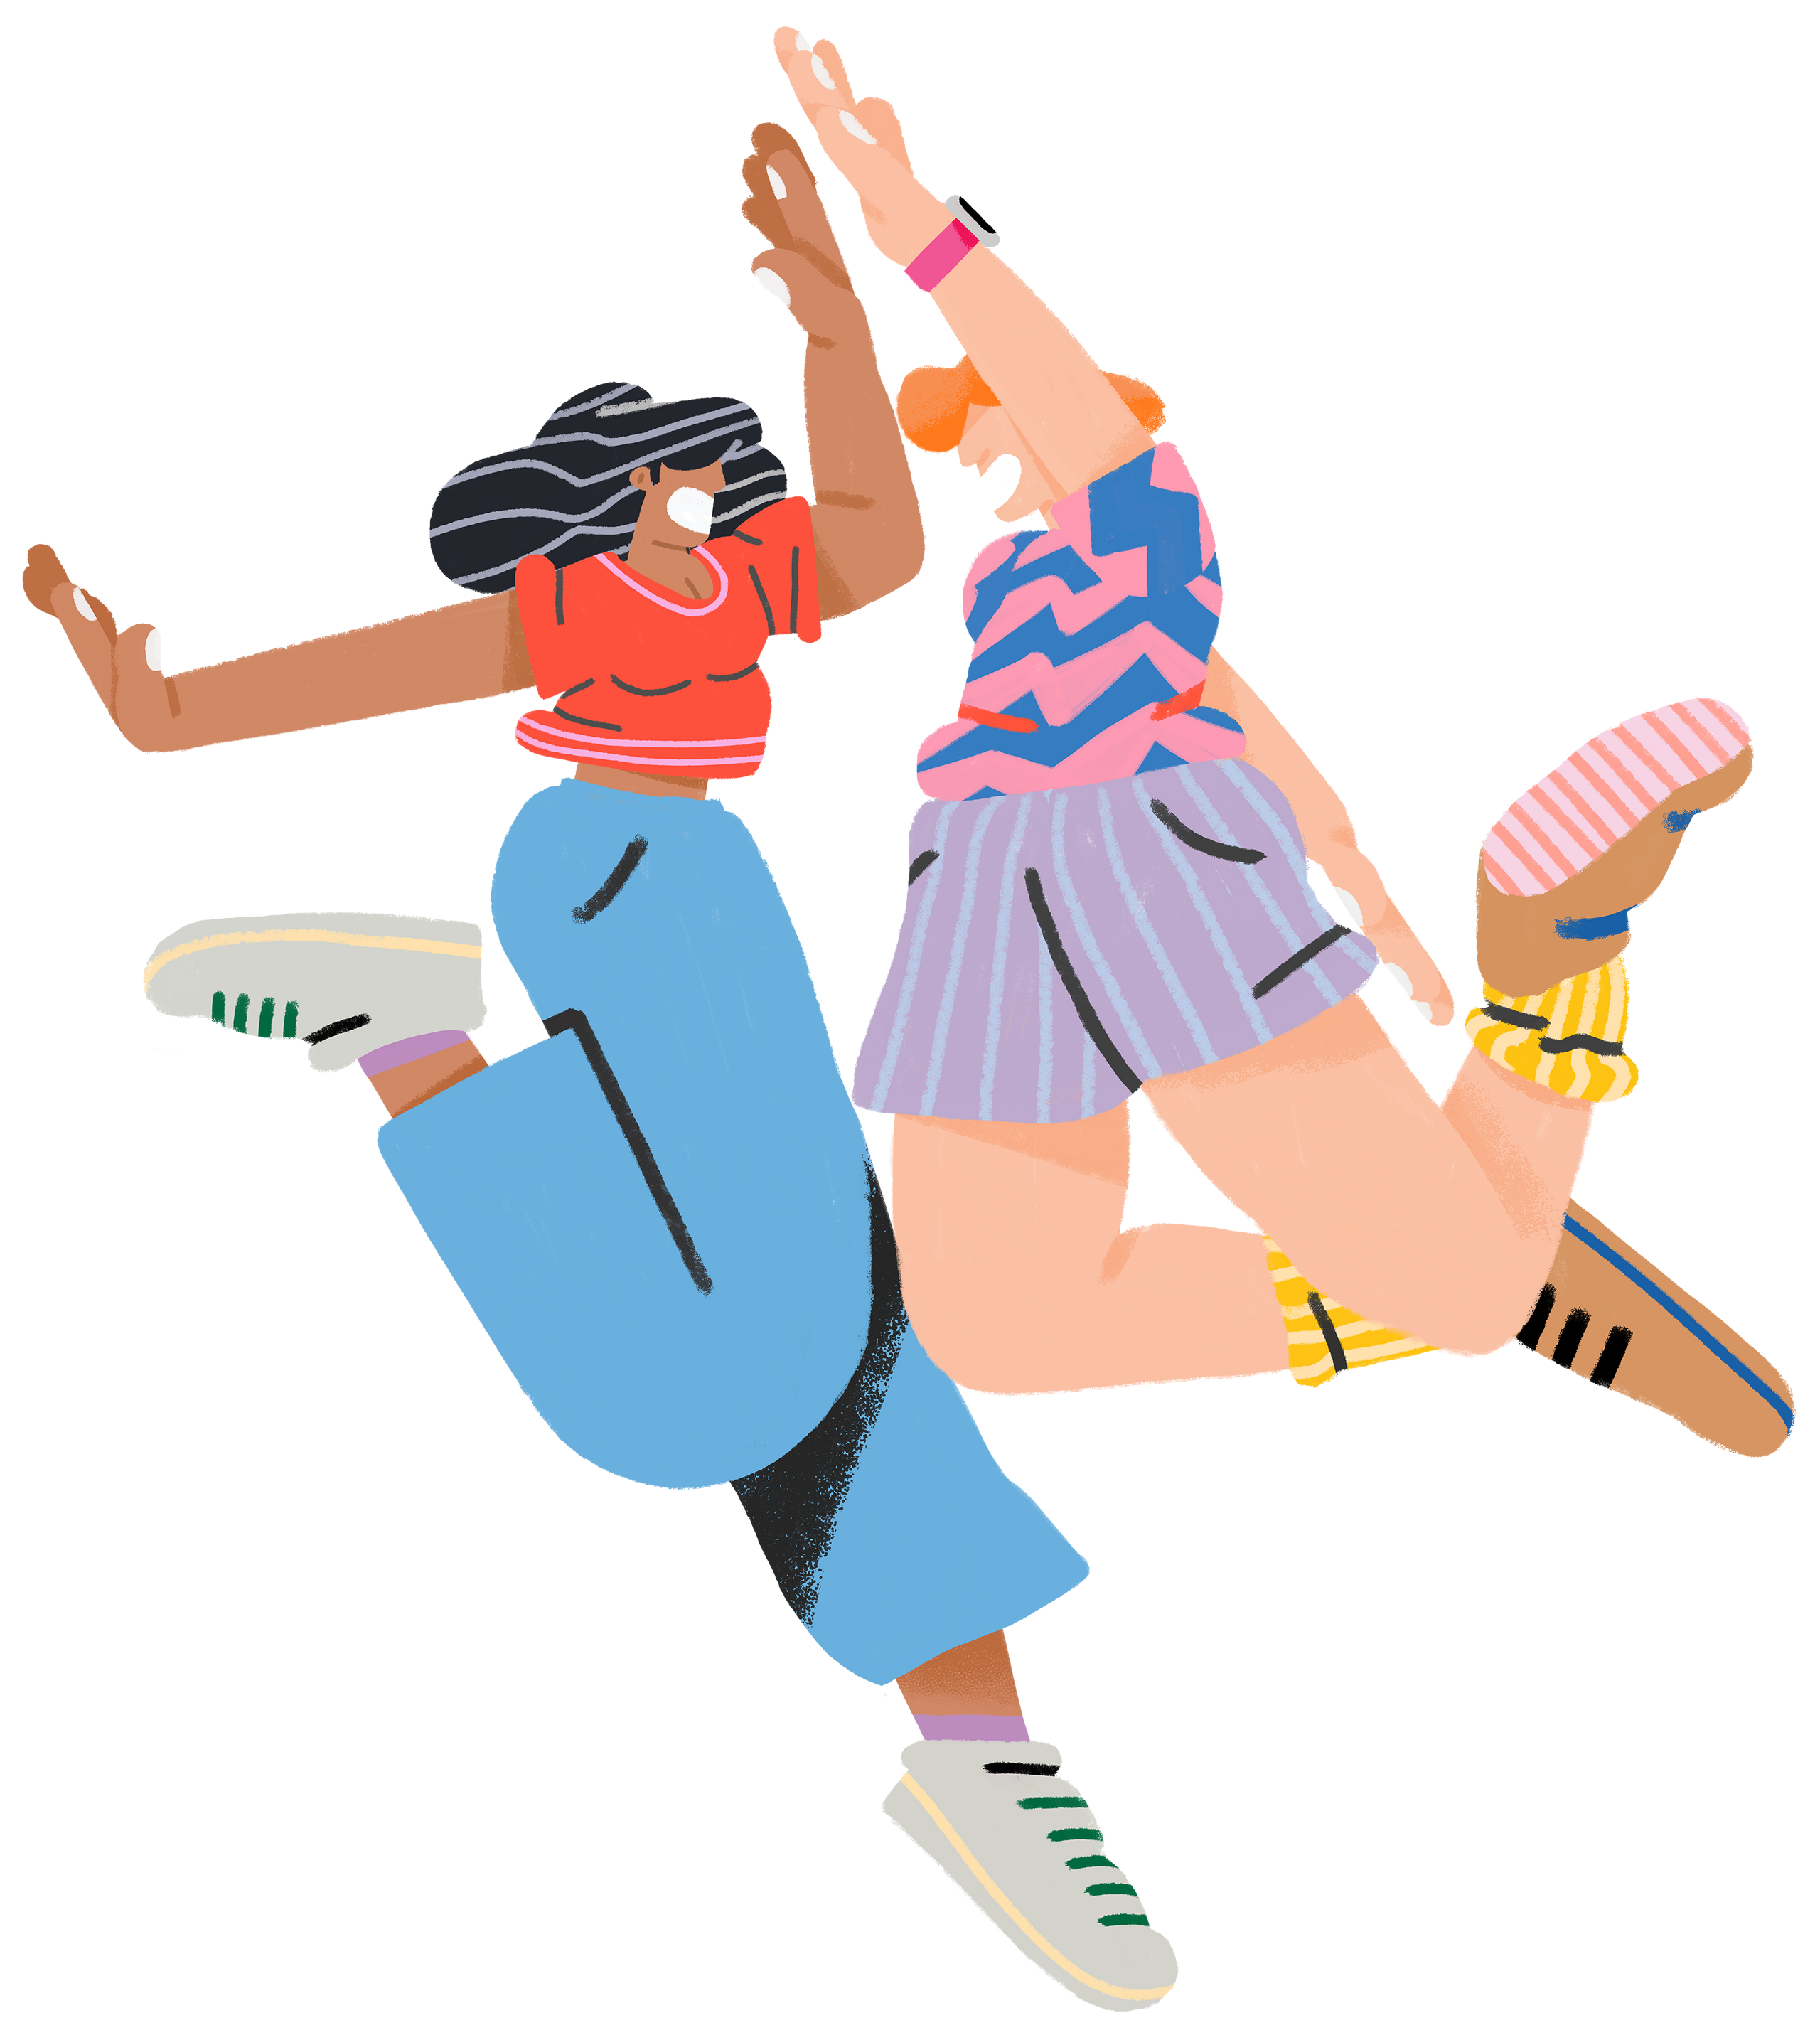 Illustration of people jumping and high-fiving